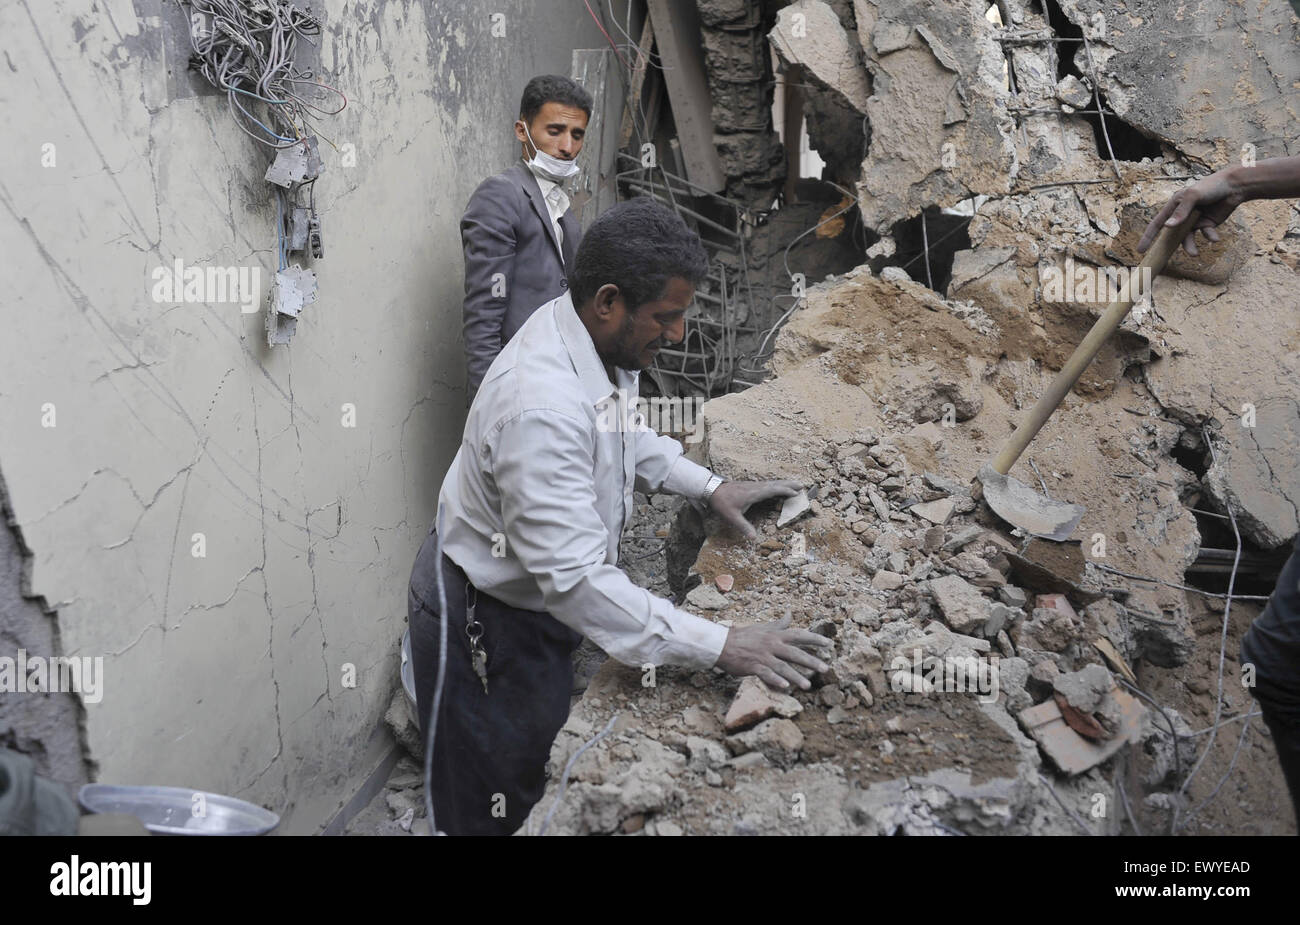 Sanaa, Yemen. 2nd July, 2015. Two Yemenis stand in a house destroyed in the airstrike in Sanaa, Yemen, on July 2, 2015. Airstrikes of the Saudi-led coalition forces hit the house of former Yemeni Prime Minister Faraj Said Bin Ghanem in Sanaa on Thursday, killing the family of a guard including three children and the parents. Faraj Said Bin Ghanem was the prime minister of Yemen from May 1997 to April 1998. Credit:  Hani Ali/Xinhua/Alamy Live News Stock Photo